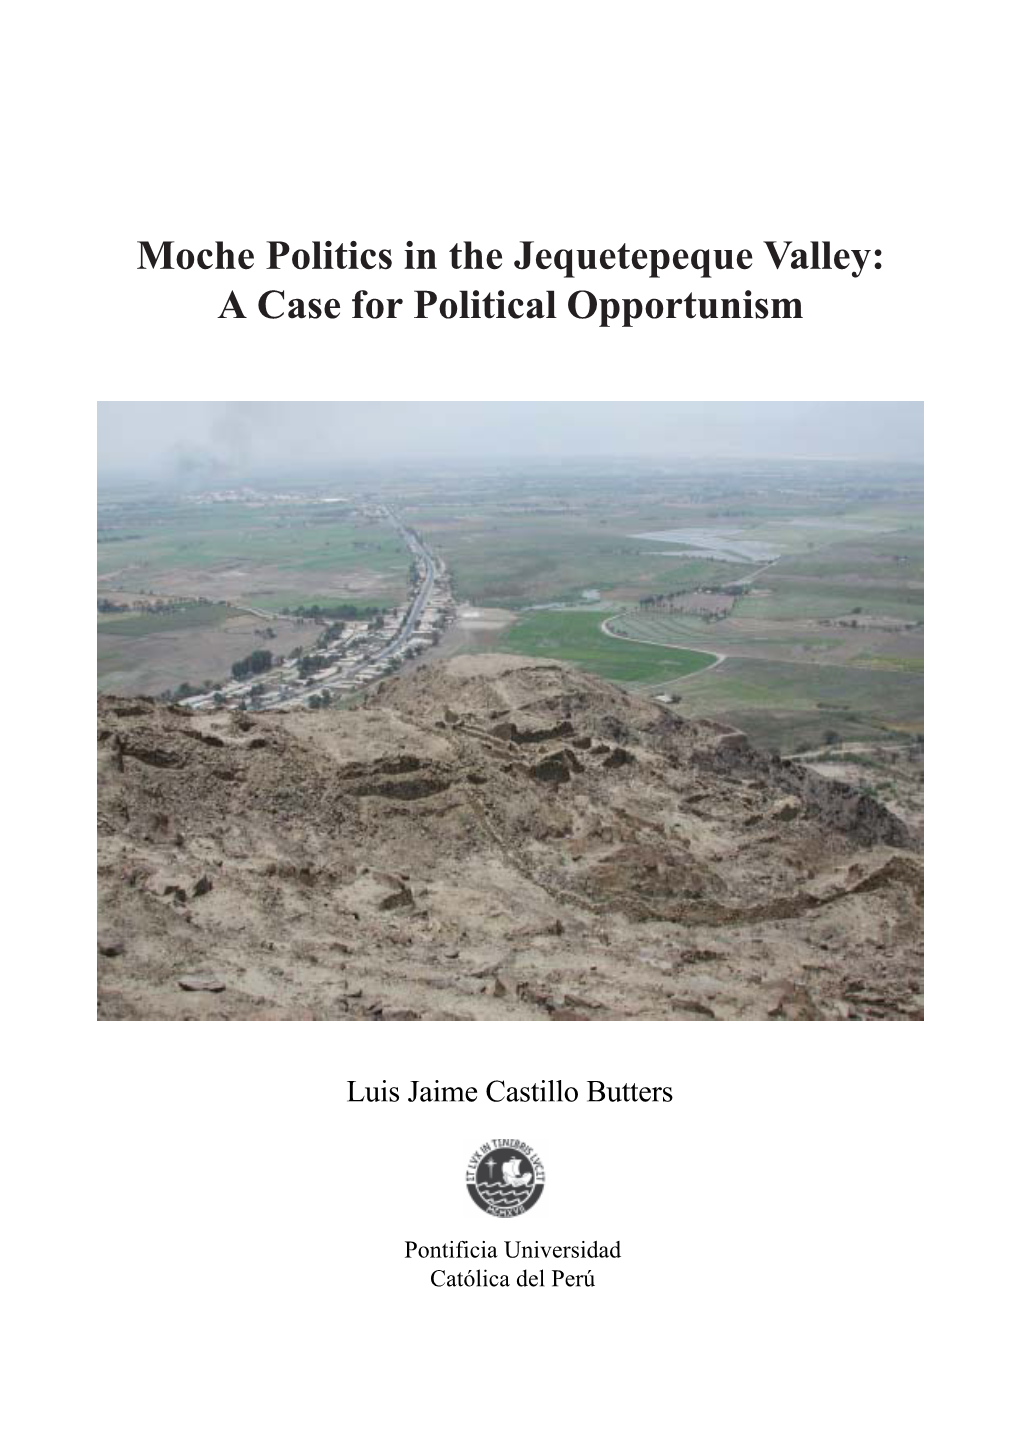 Moche Politics in the Jequetepeque Valley: a Case for Political Opportunism